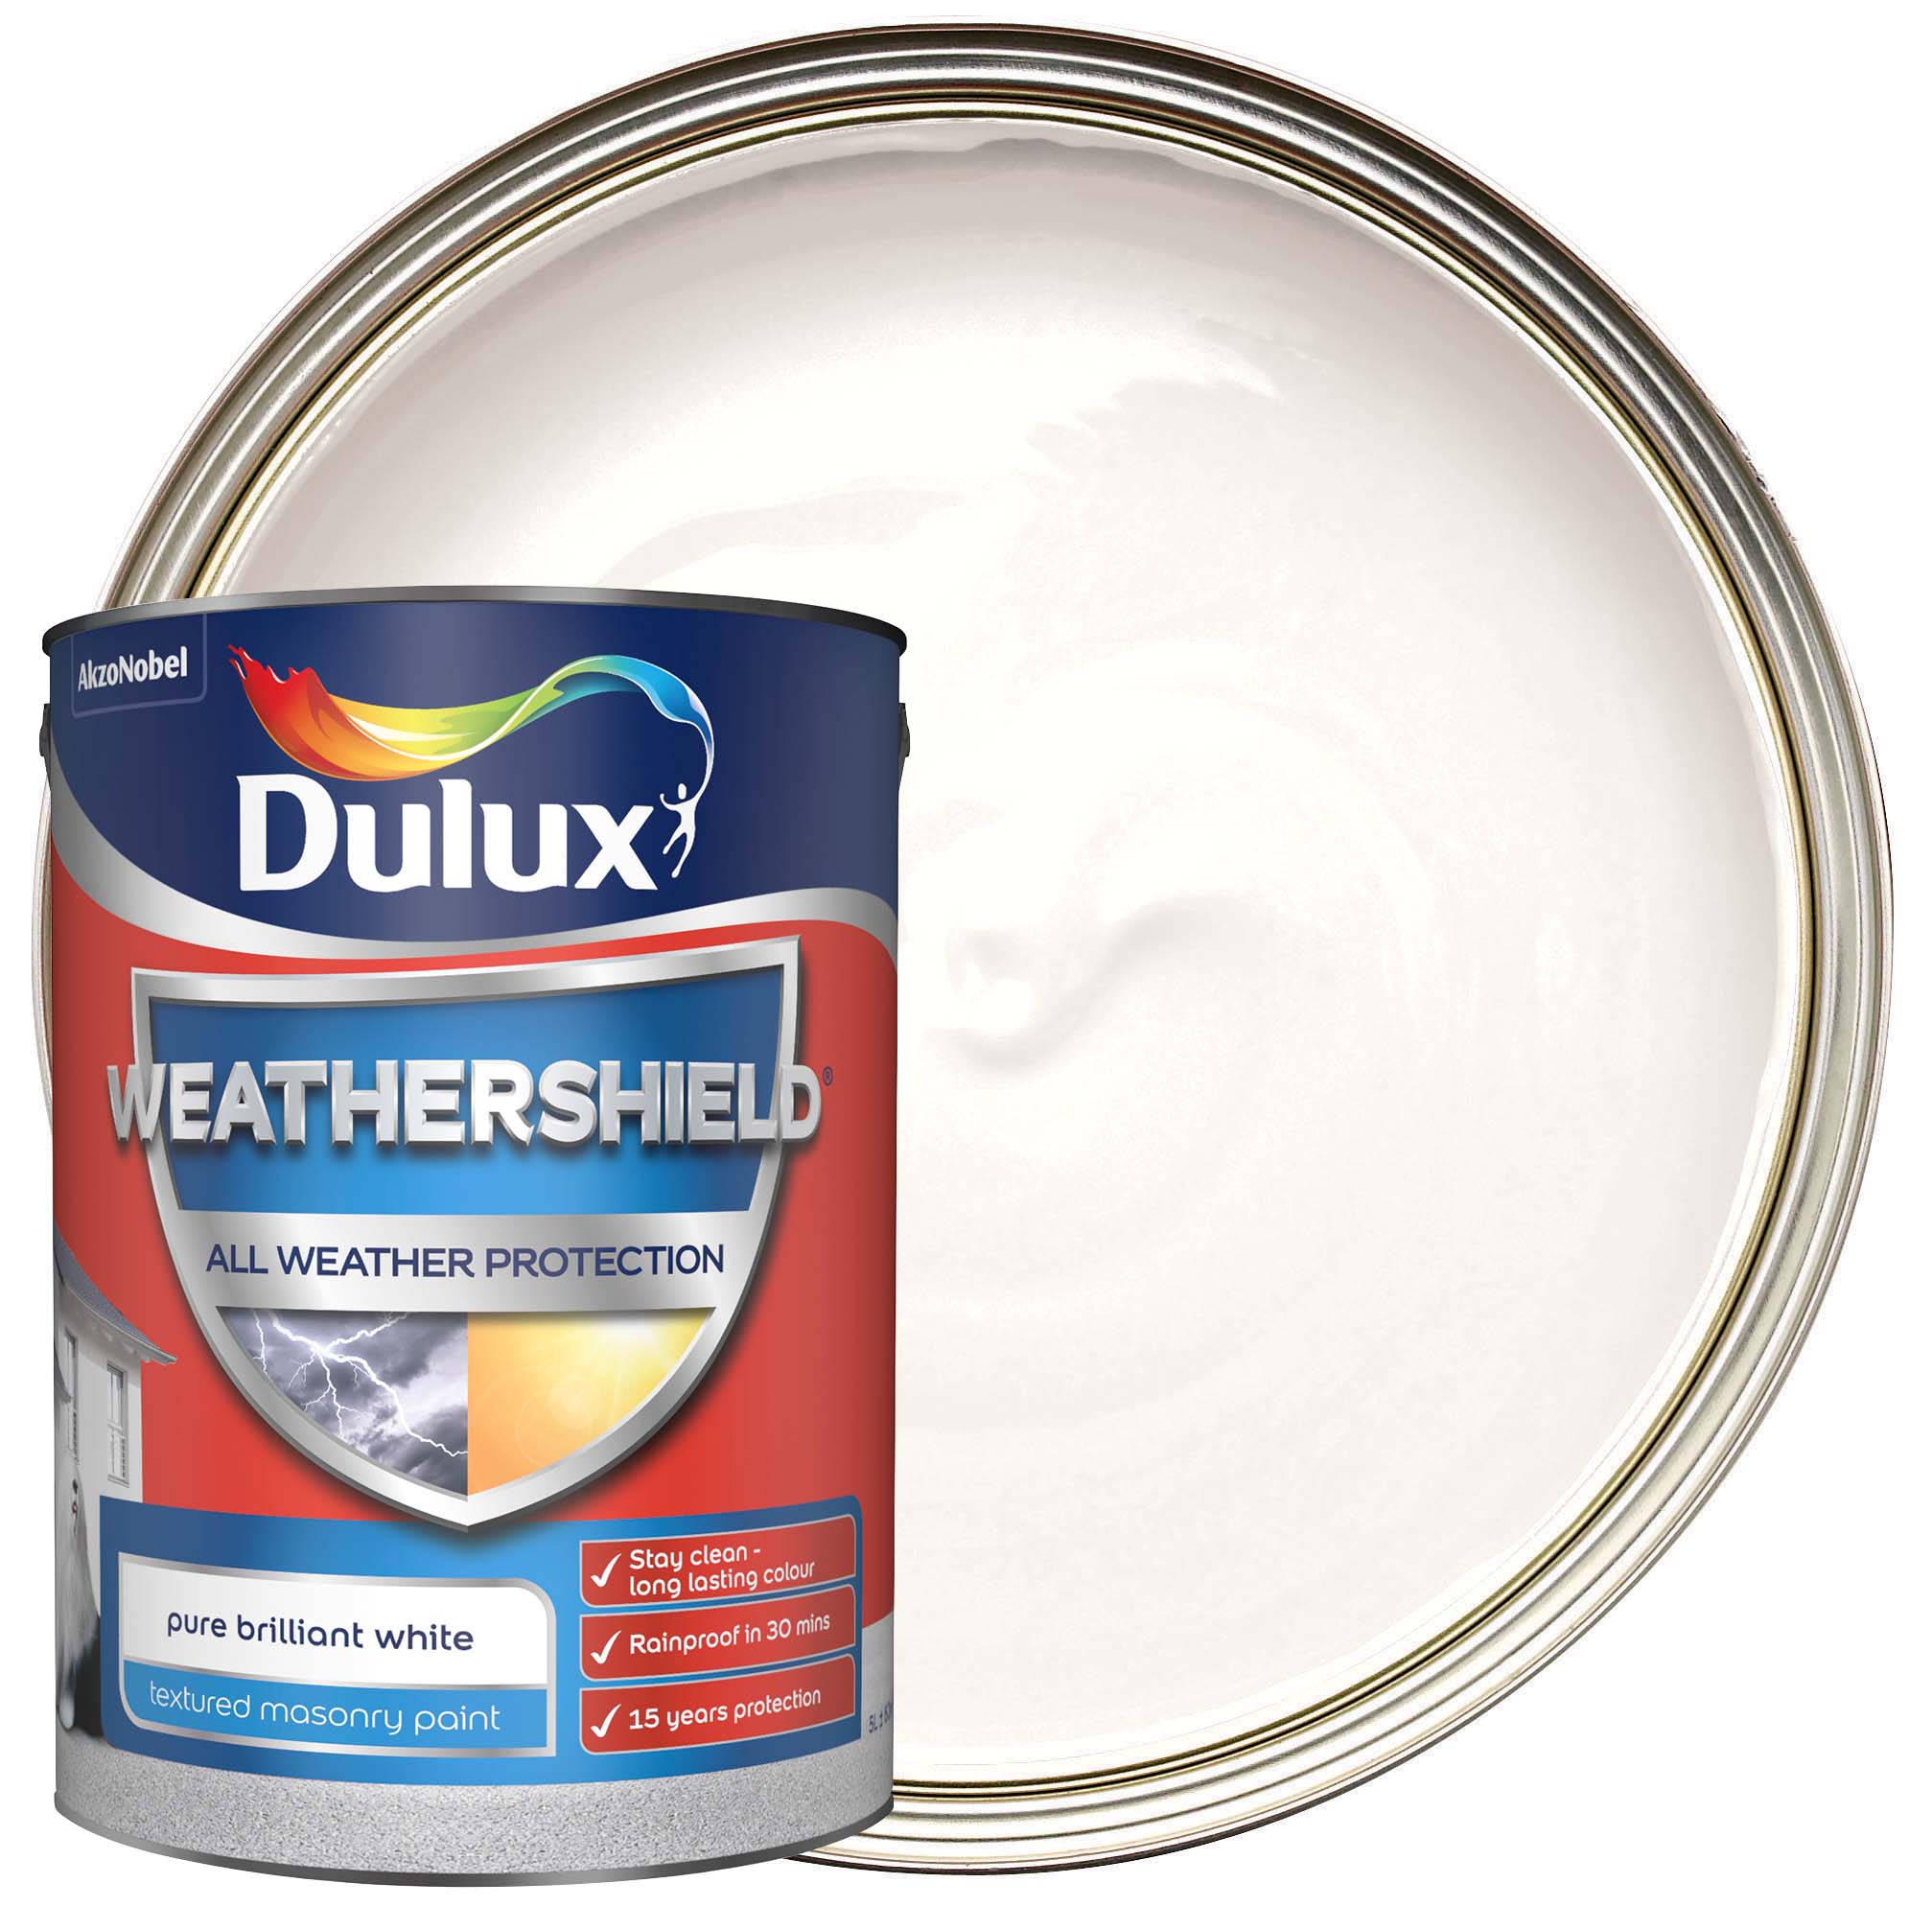 Dulux Weathershield All Weather Purpose Textured Paint - Pure Brilliant White - 5L